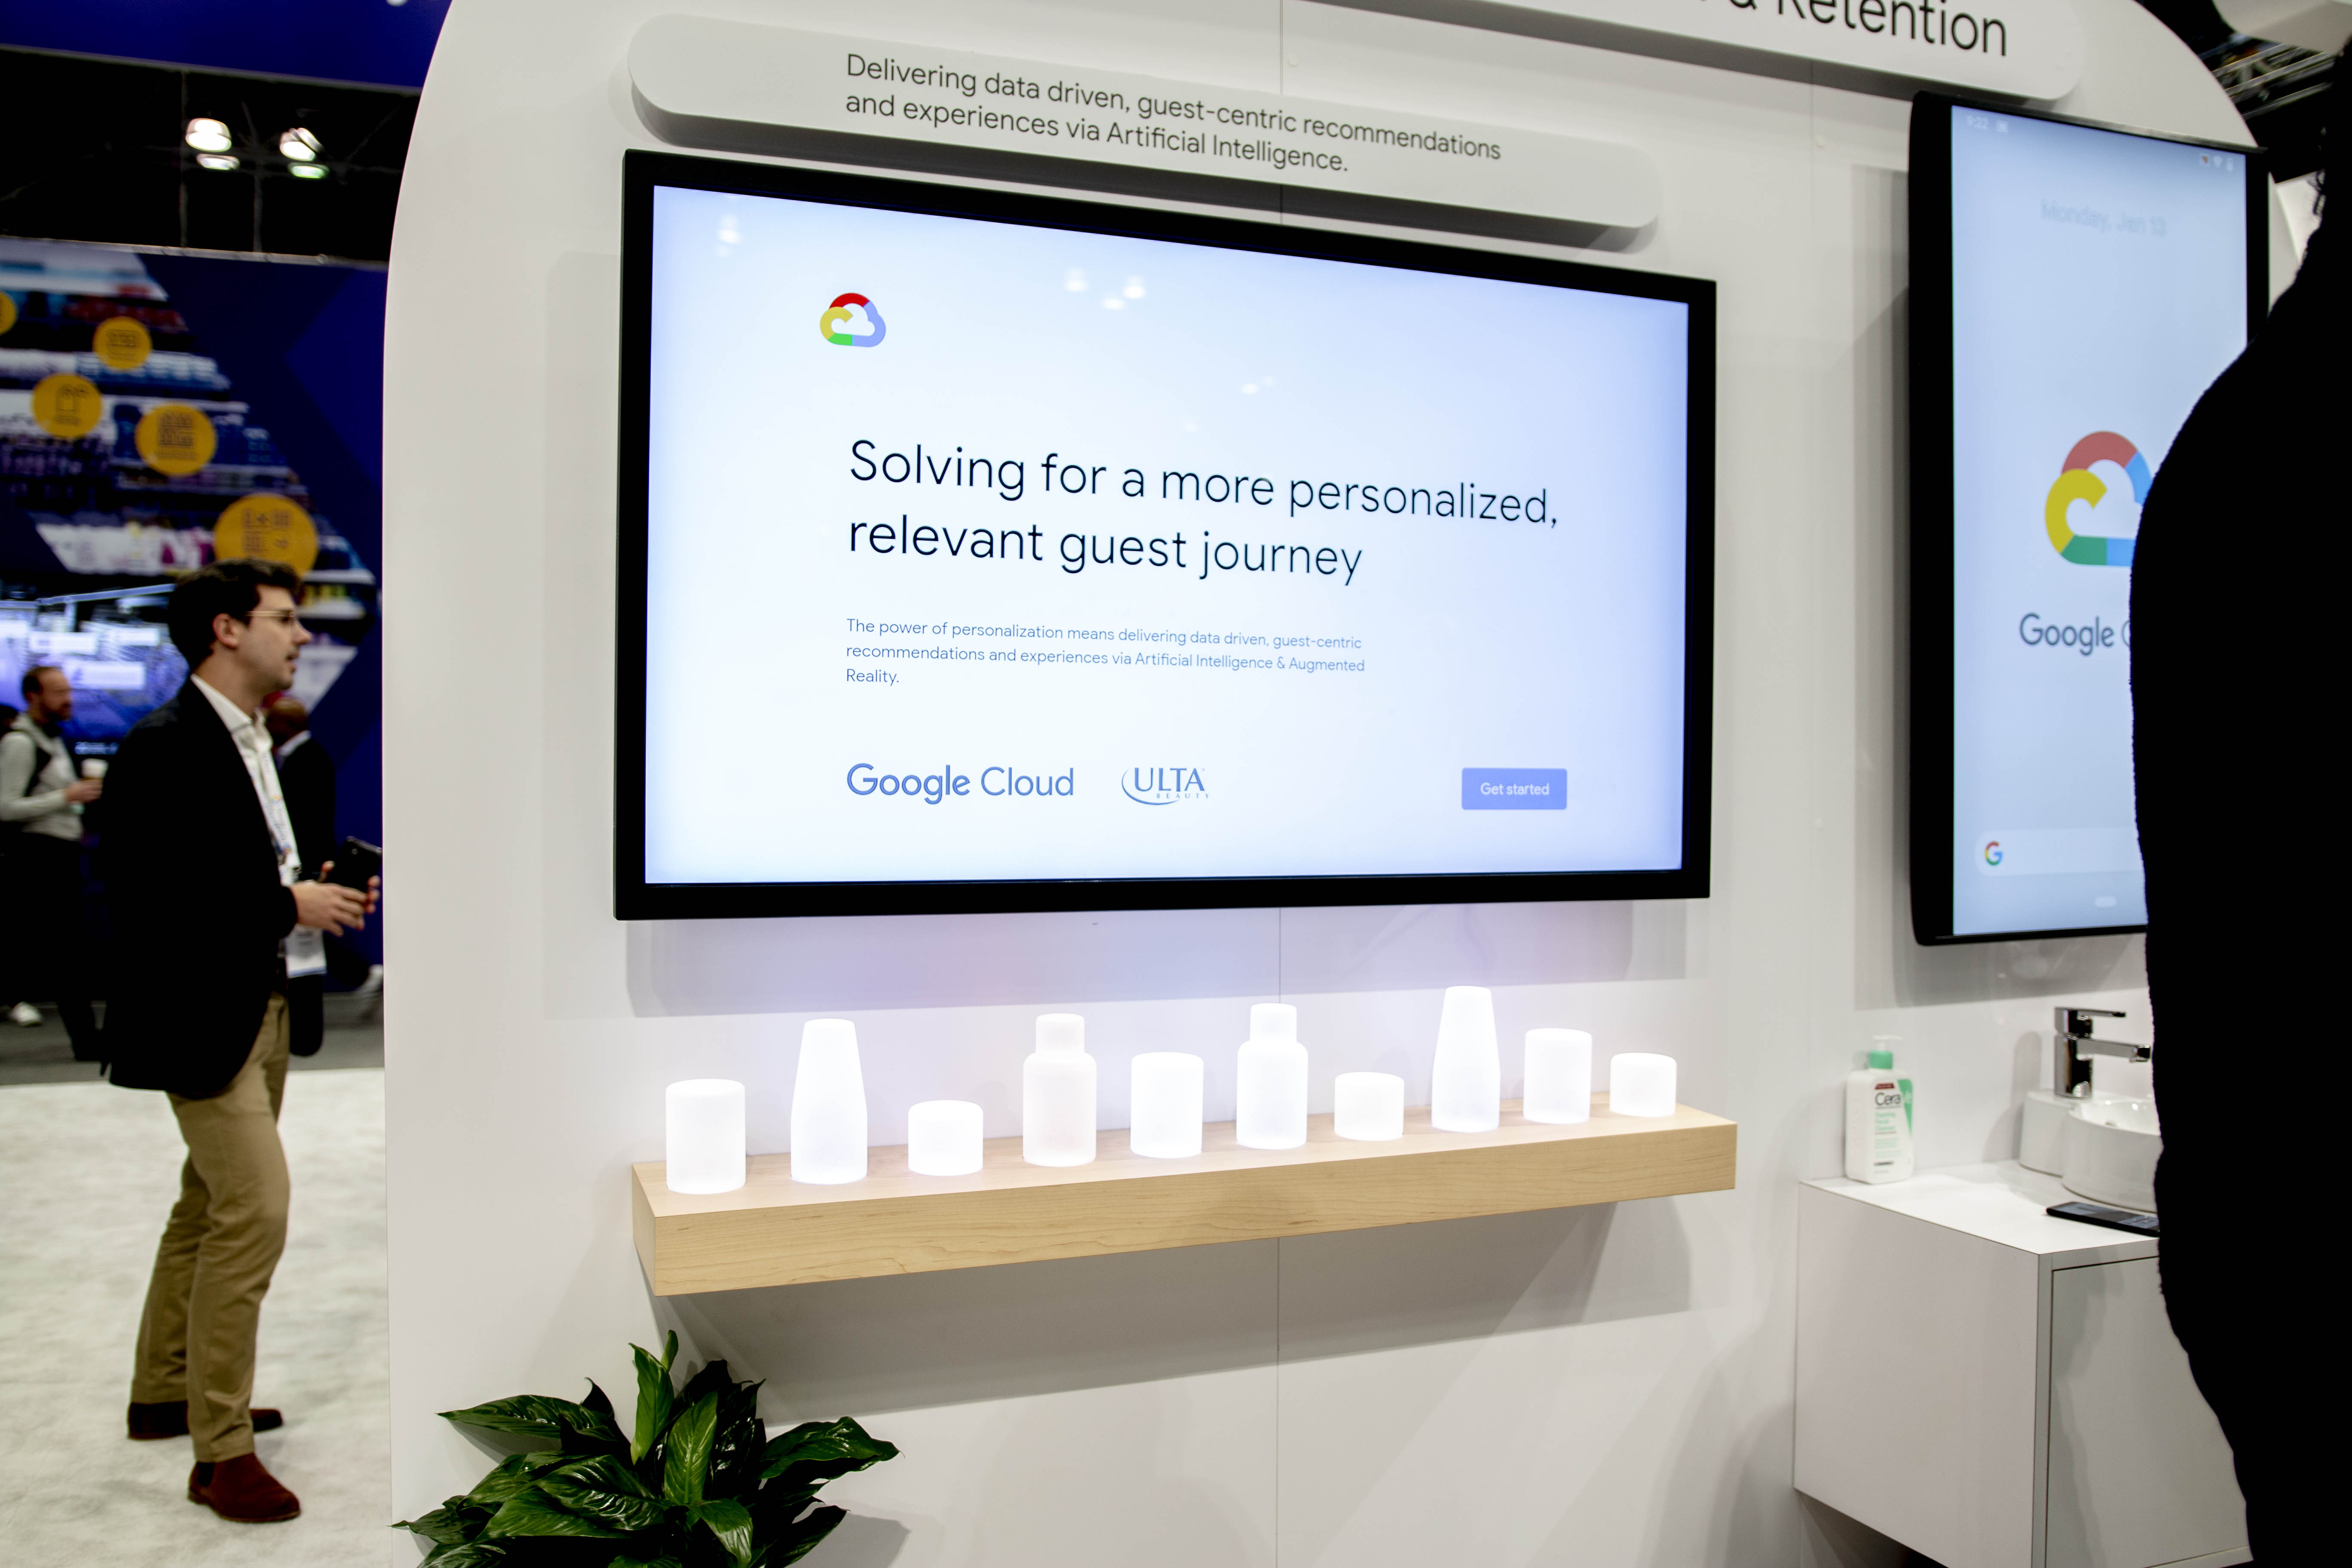 Google at NRF 2020 by Marcus Guttenplan for Sparks and Ulta